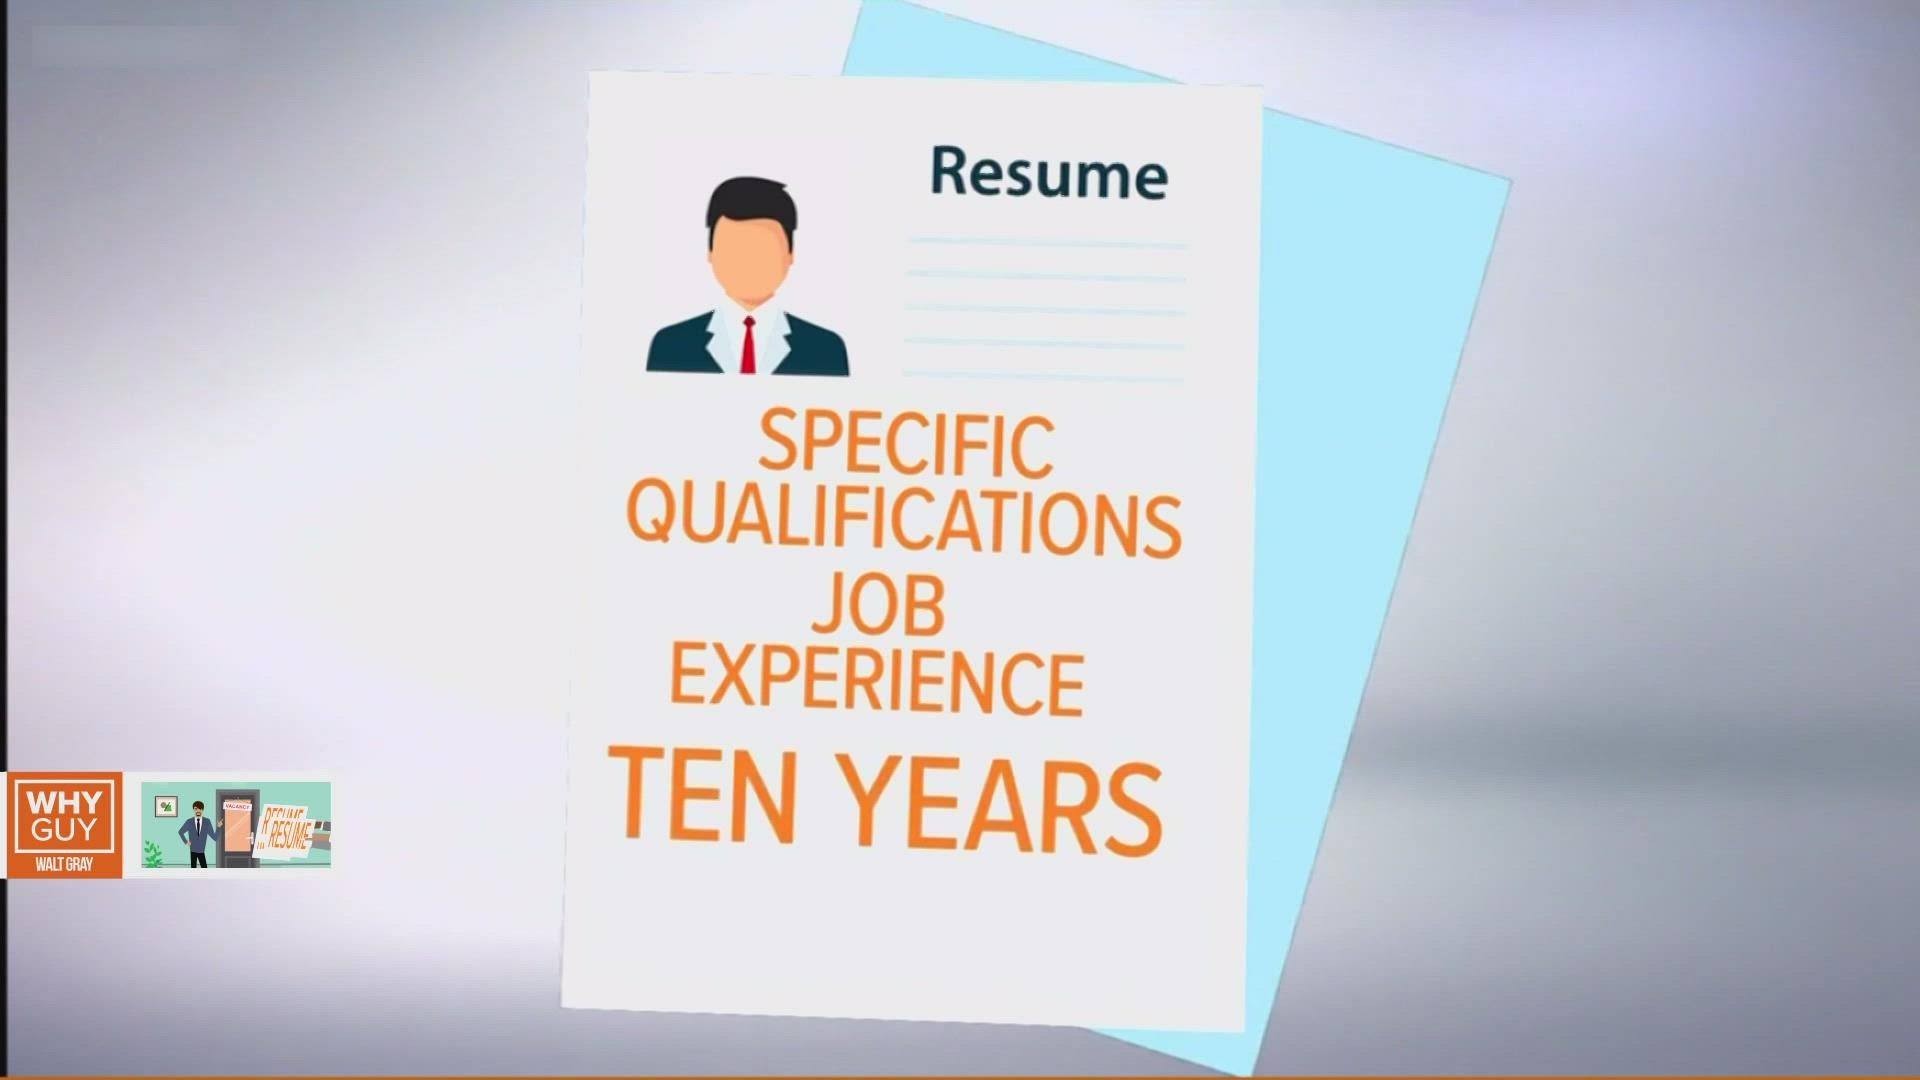 A study found that job recruiters spend an average of 7.4 seconds looking at a resume before deciding if a prospective employee is worth a second look.